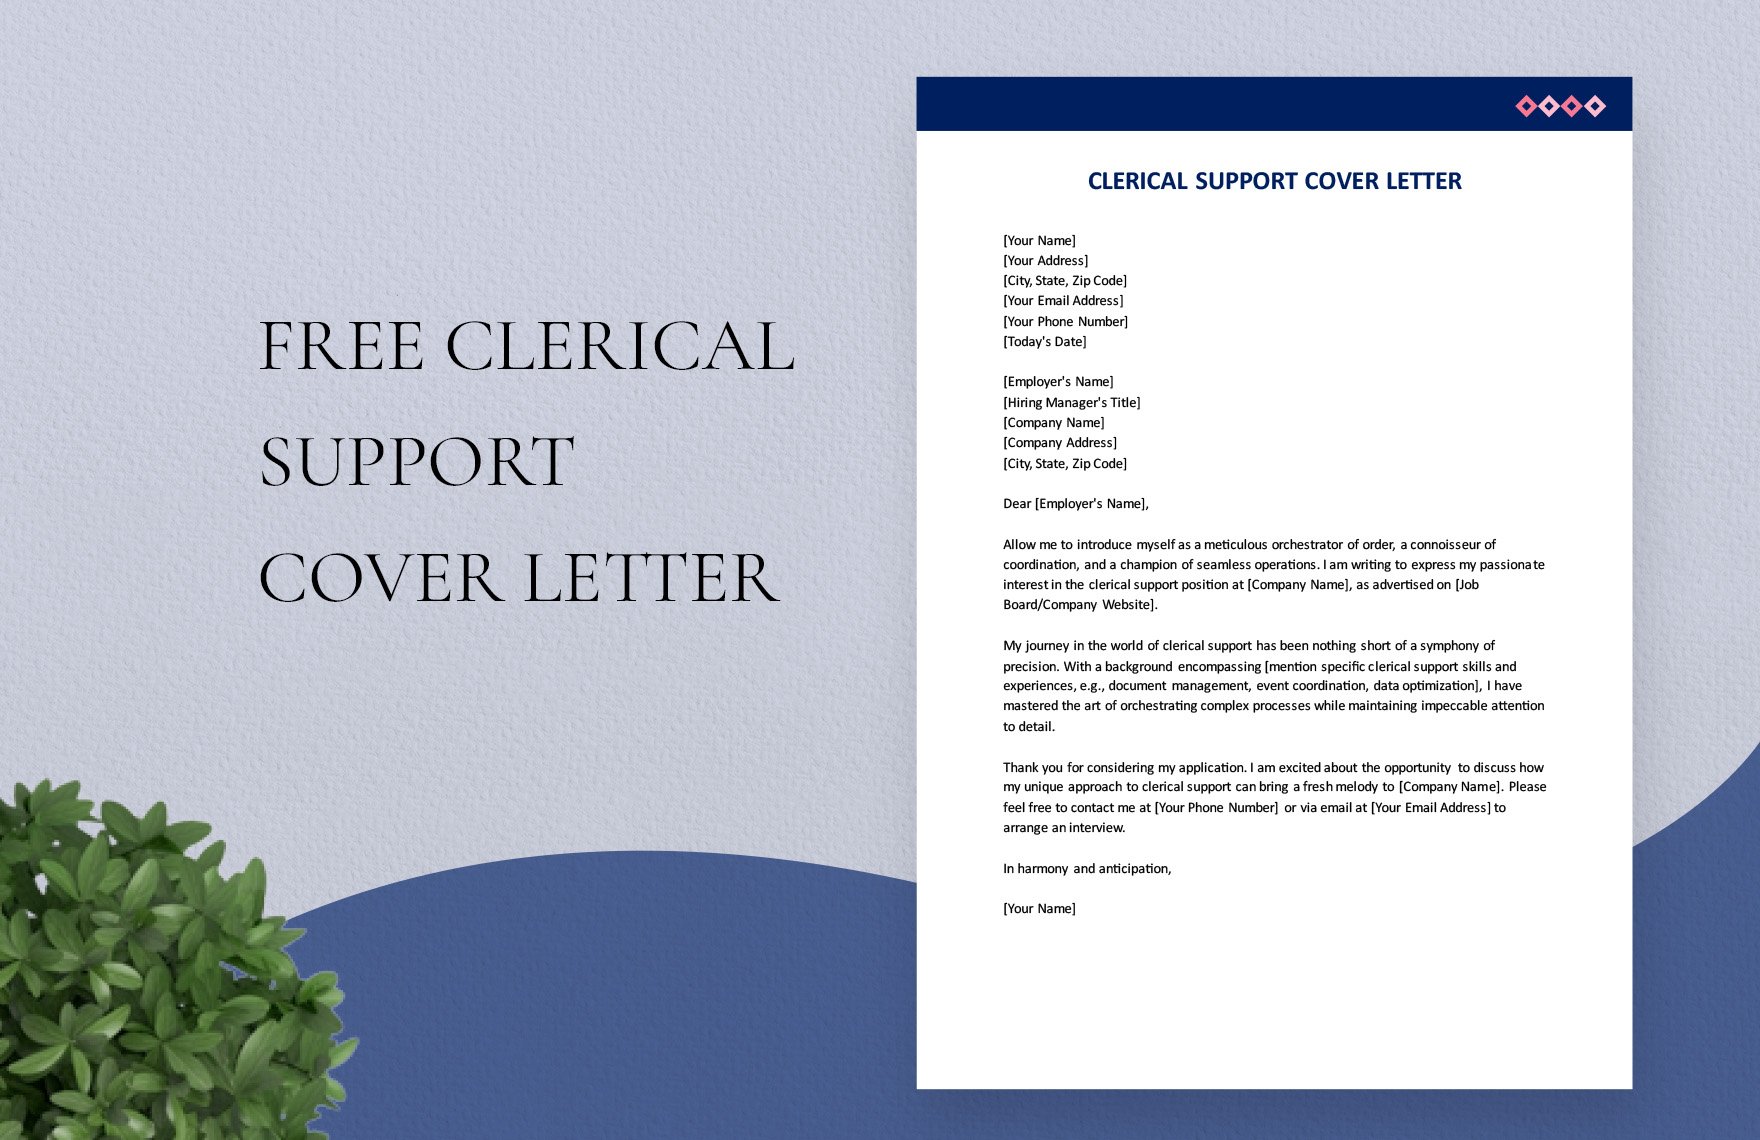 Clerical Support Cover Letter